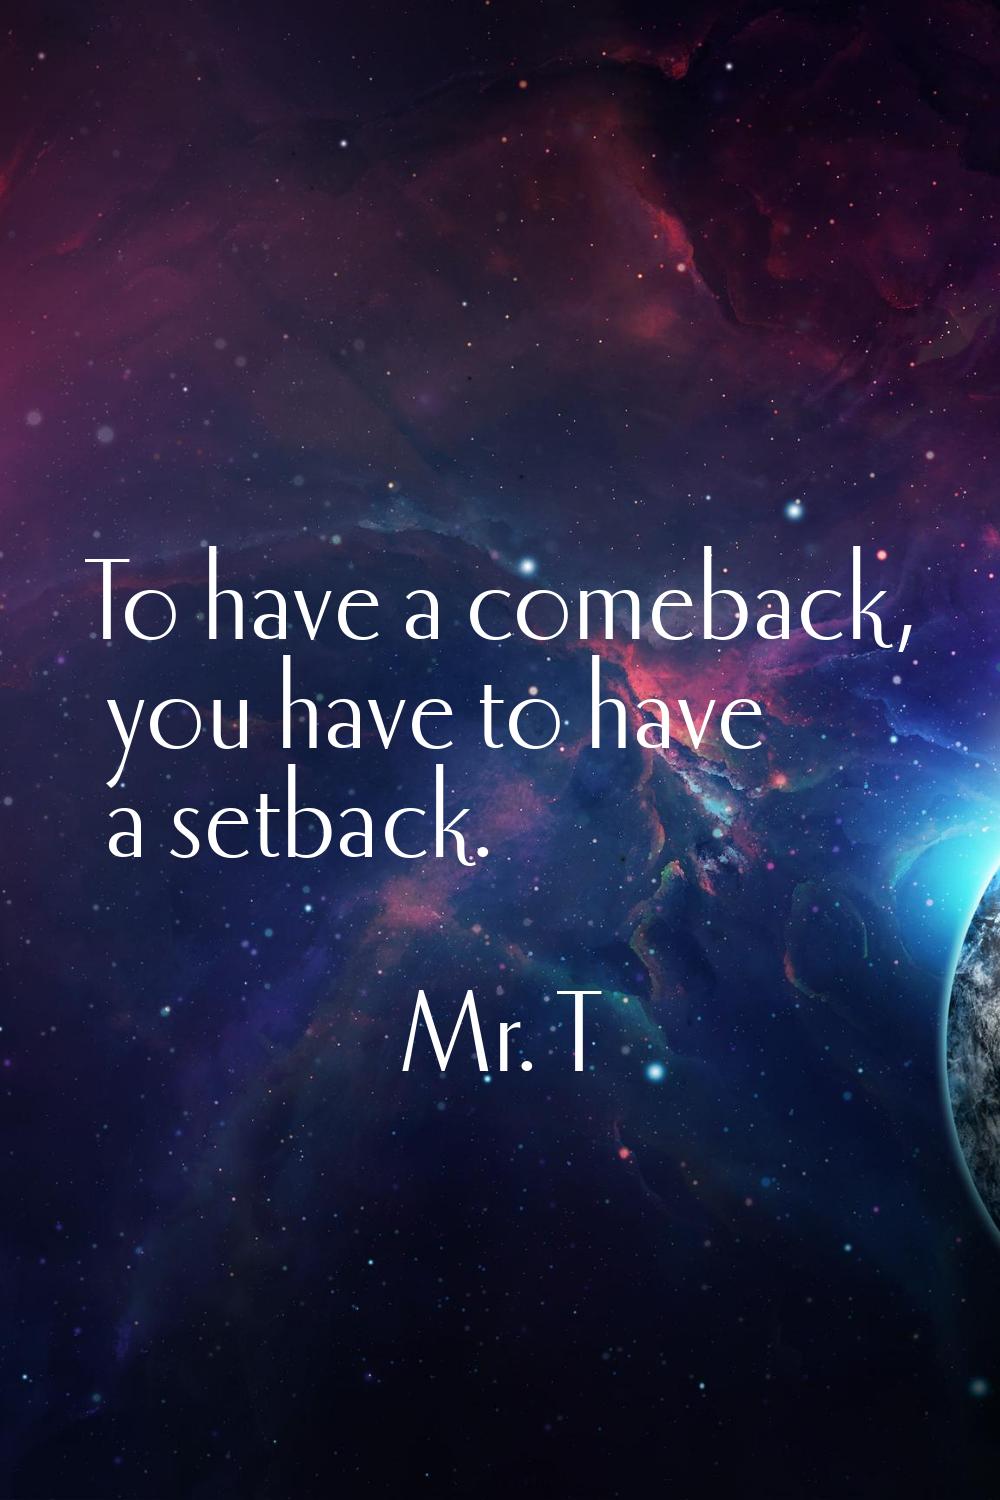 To have a comeback, you have to have a setback.